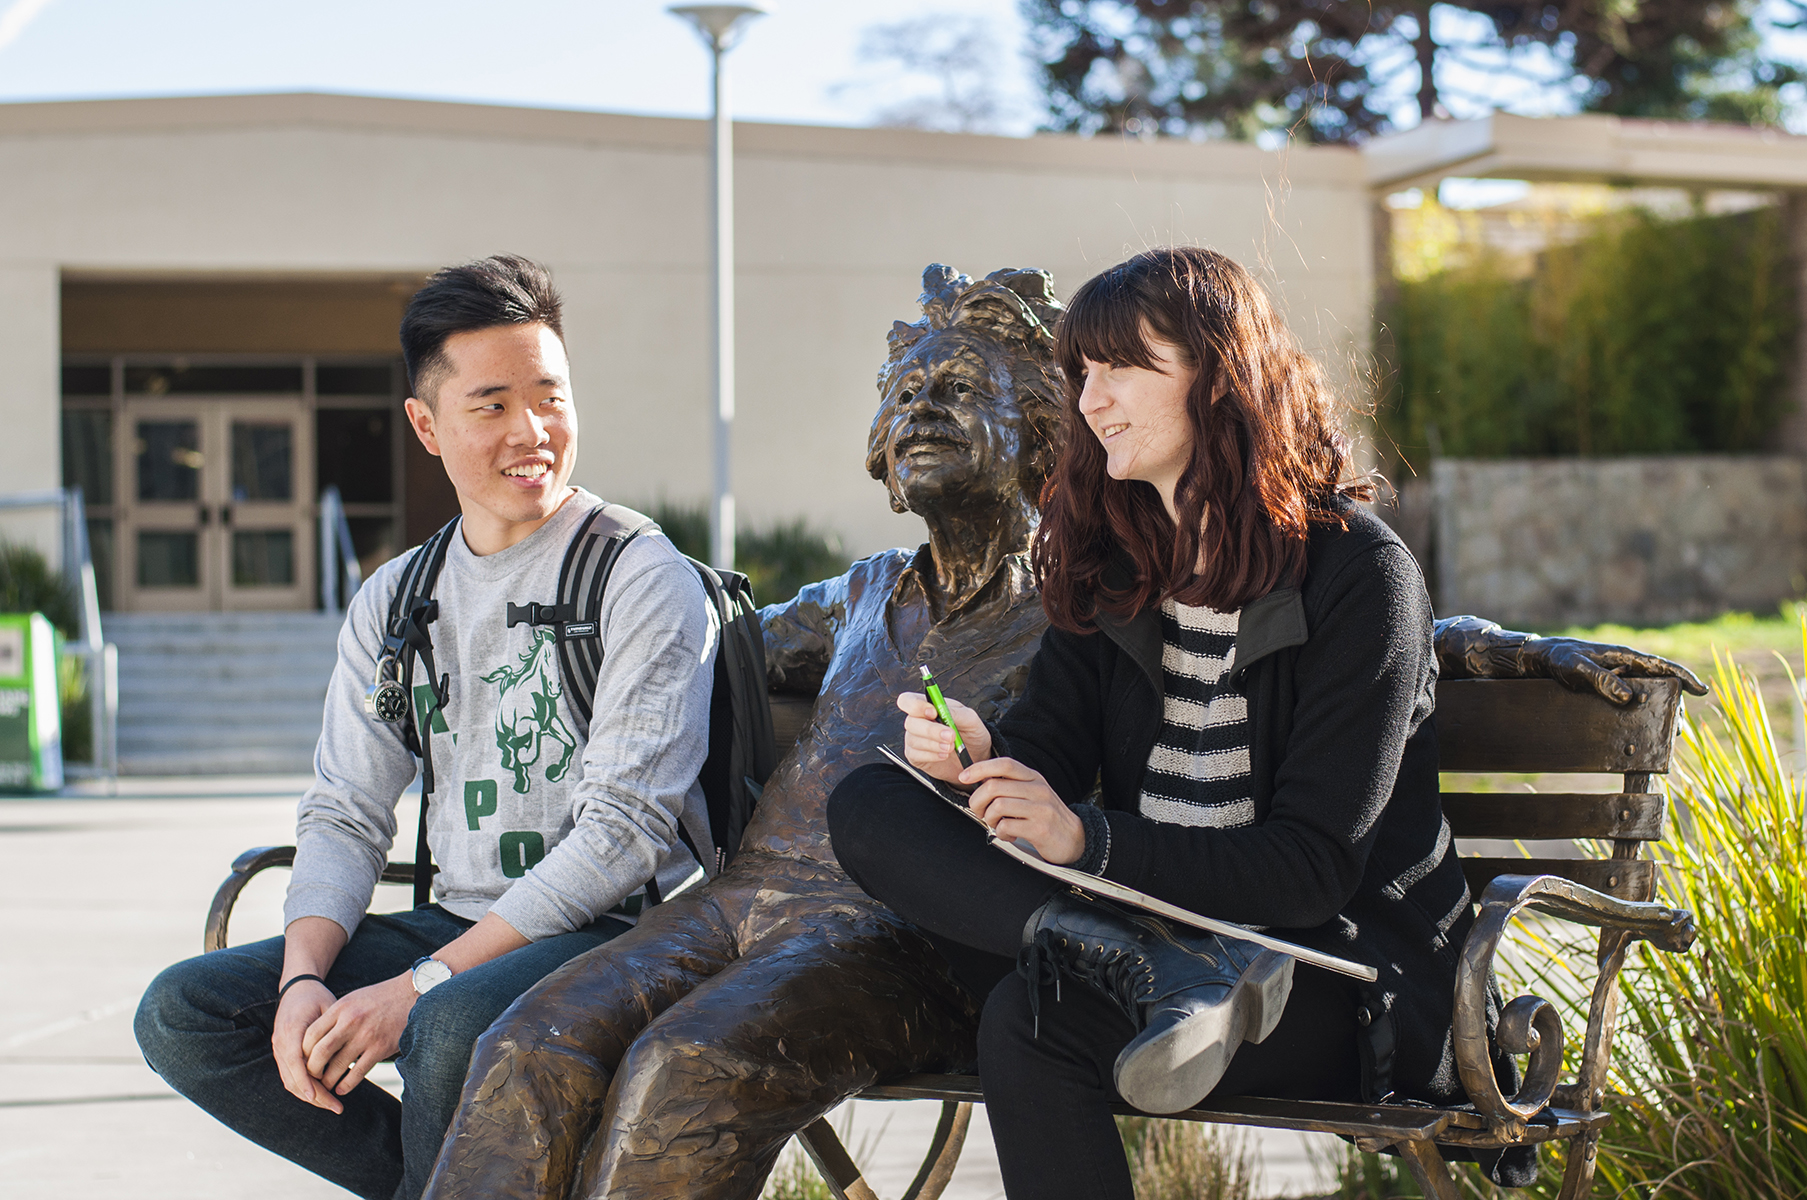 Students on a bench in campus